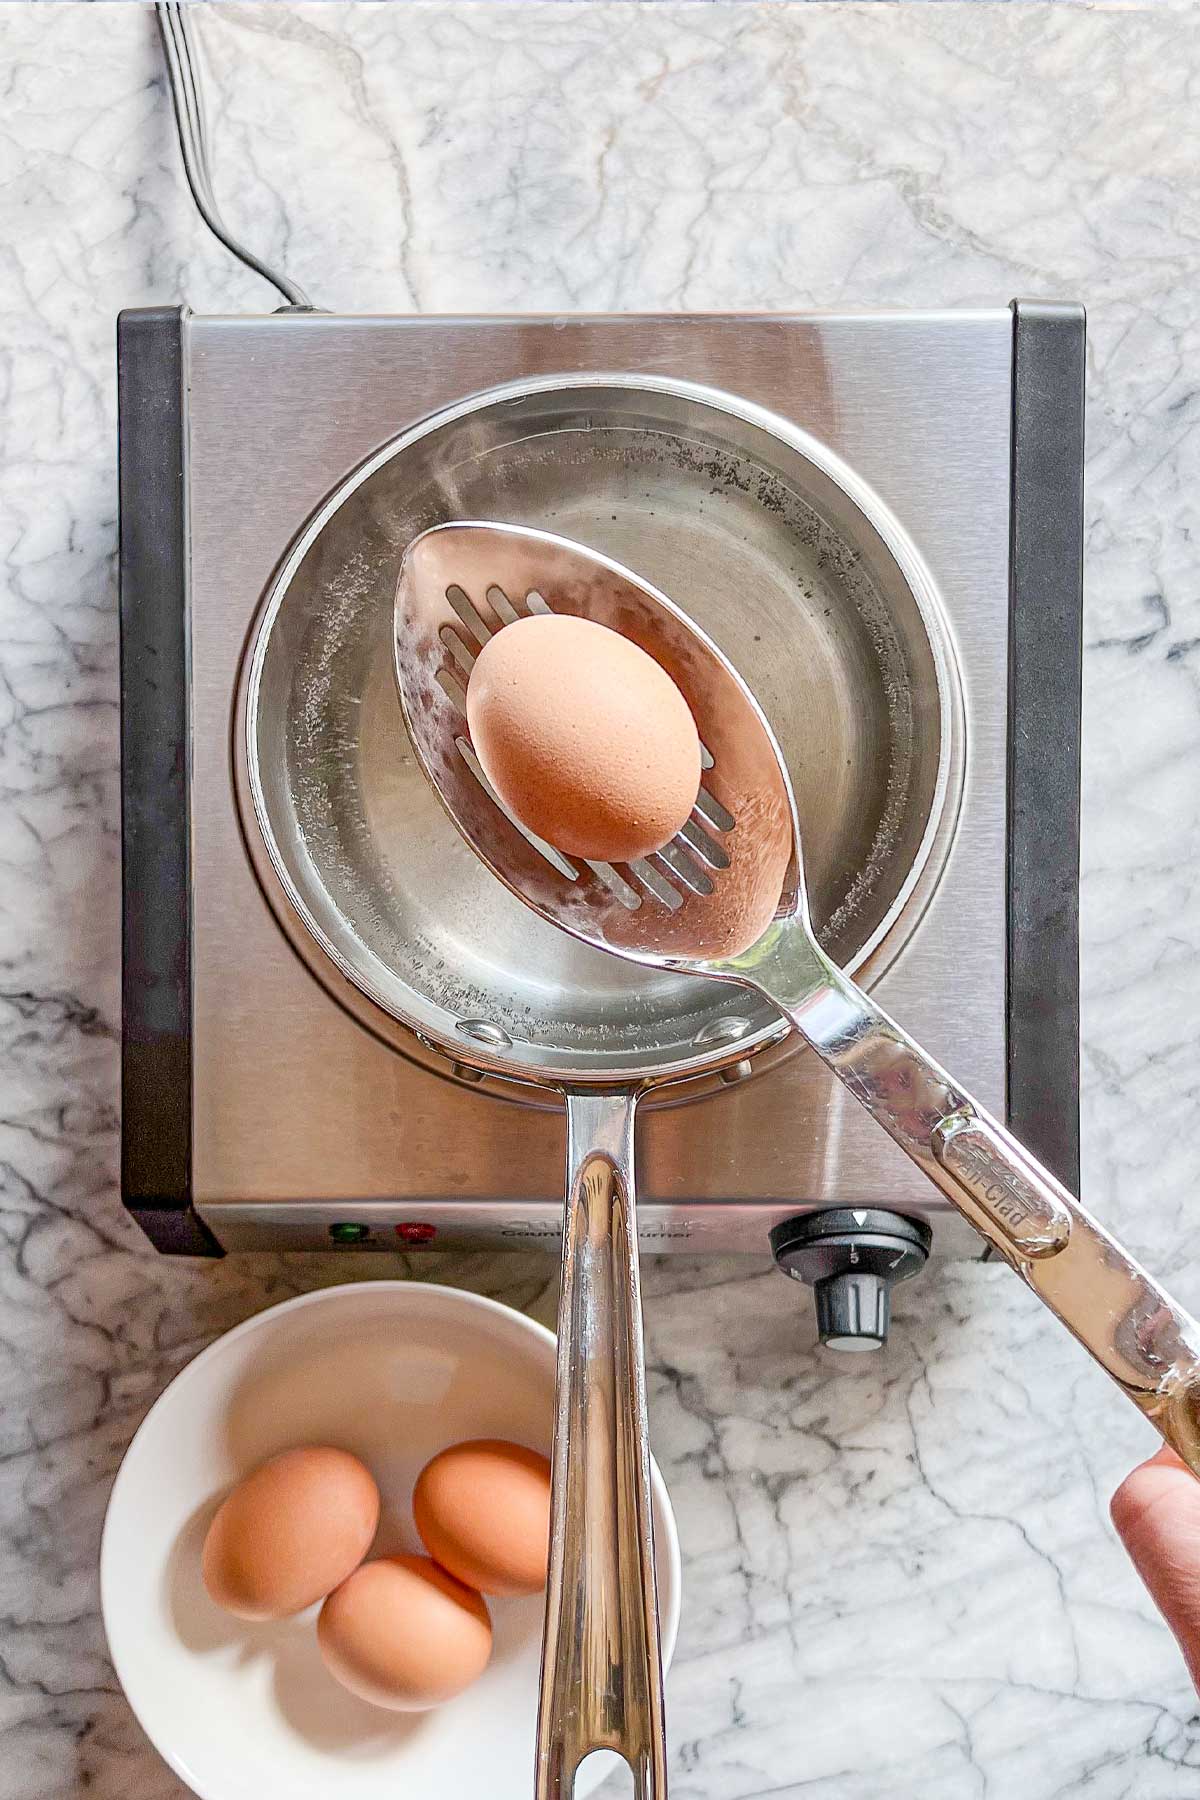 Large brown eggs being lowered into a pot of water on a stovetop burner.